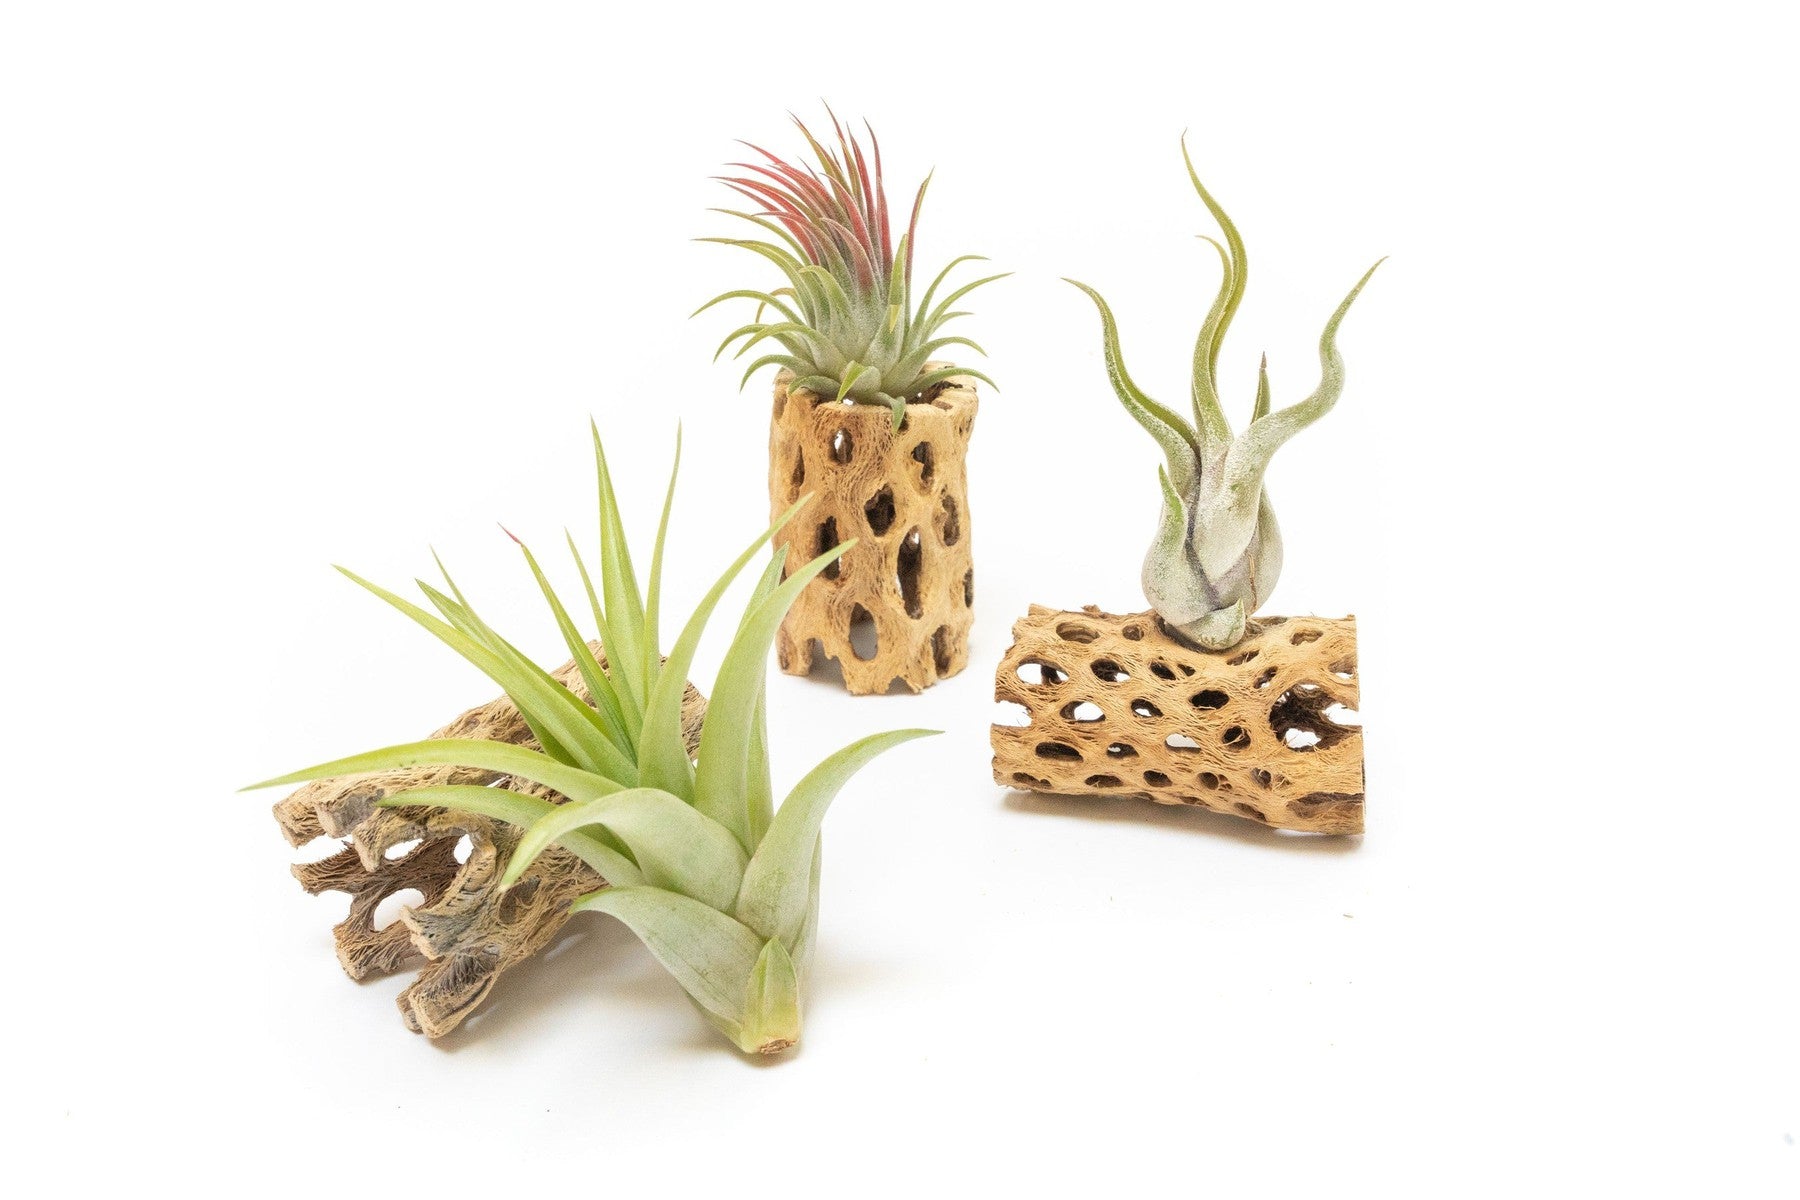 SALE - Natural Cholla Wood Containers with Assorted Tillandsia Air Plants - Set of 3 - 20% Off-The Succulent Source